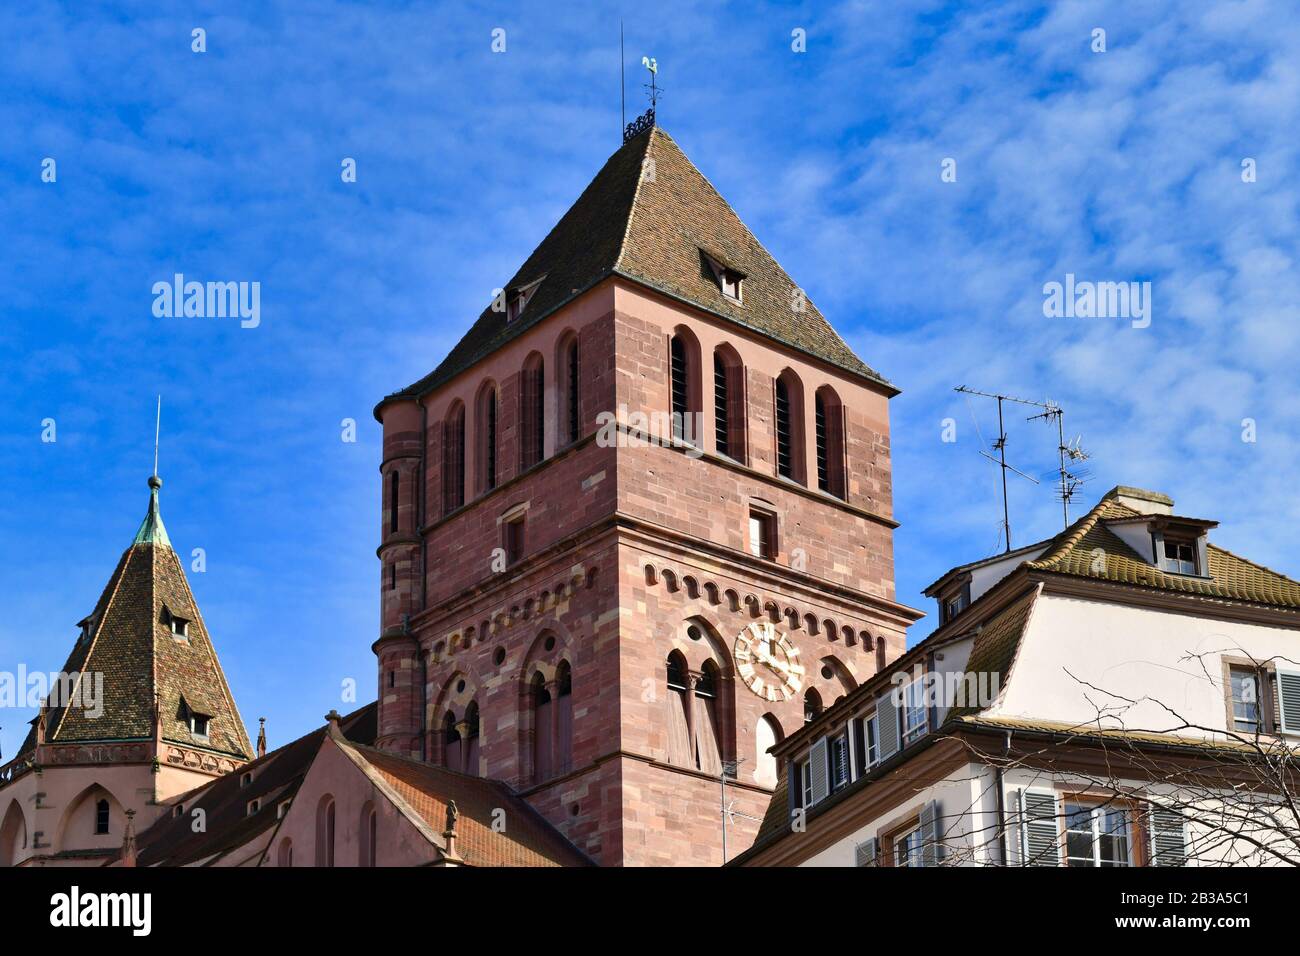 Tower of old historical Lutheran St Thomas Church, also called 'Eglise Saint Thomas' n French in Strasbourg city in France Stock Photo